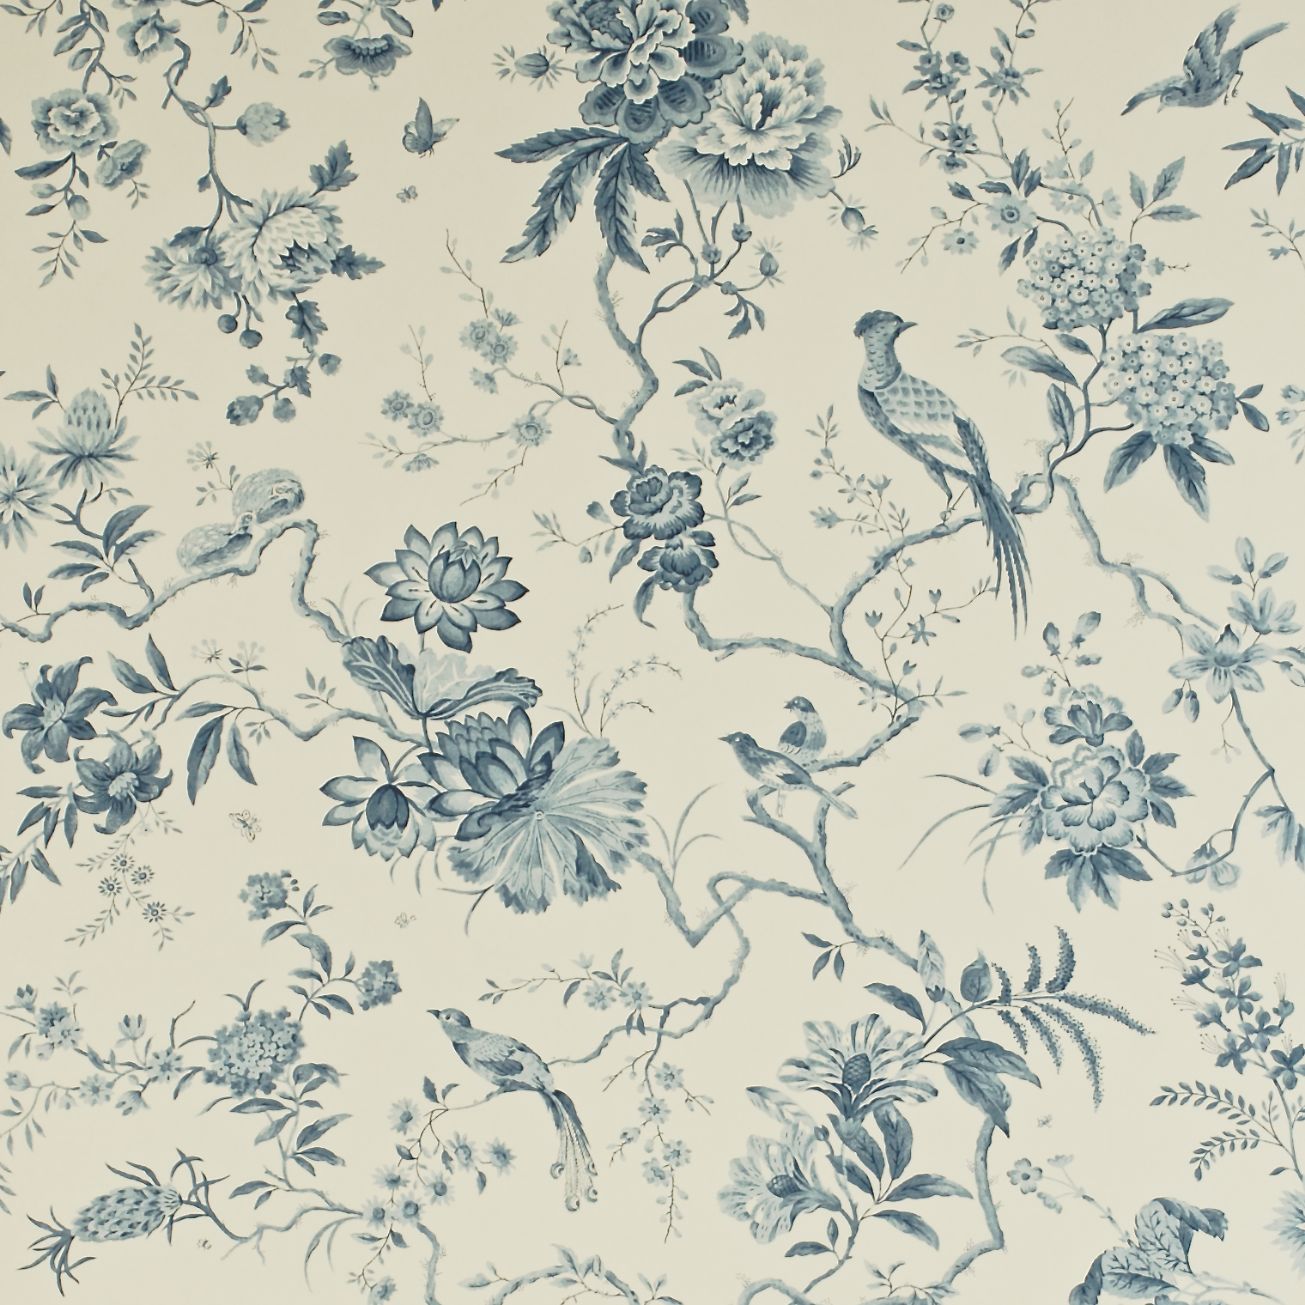 Toile Wallpaper Pemberley Collection Sanderson